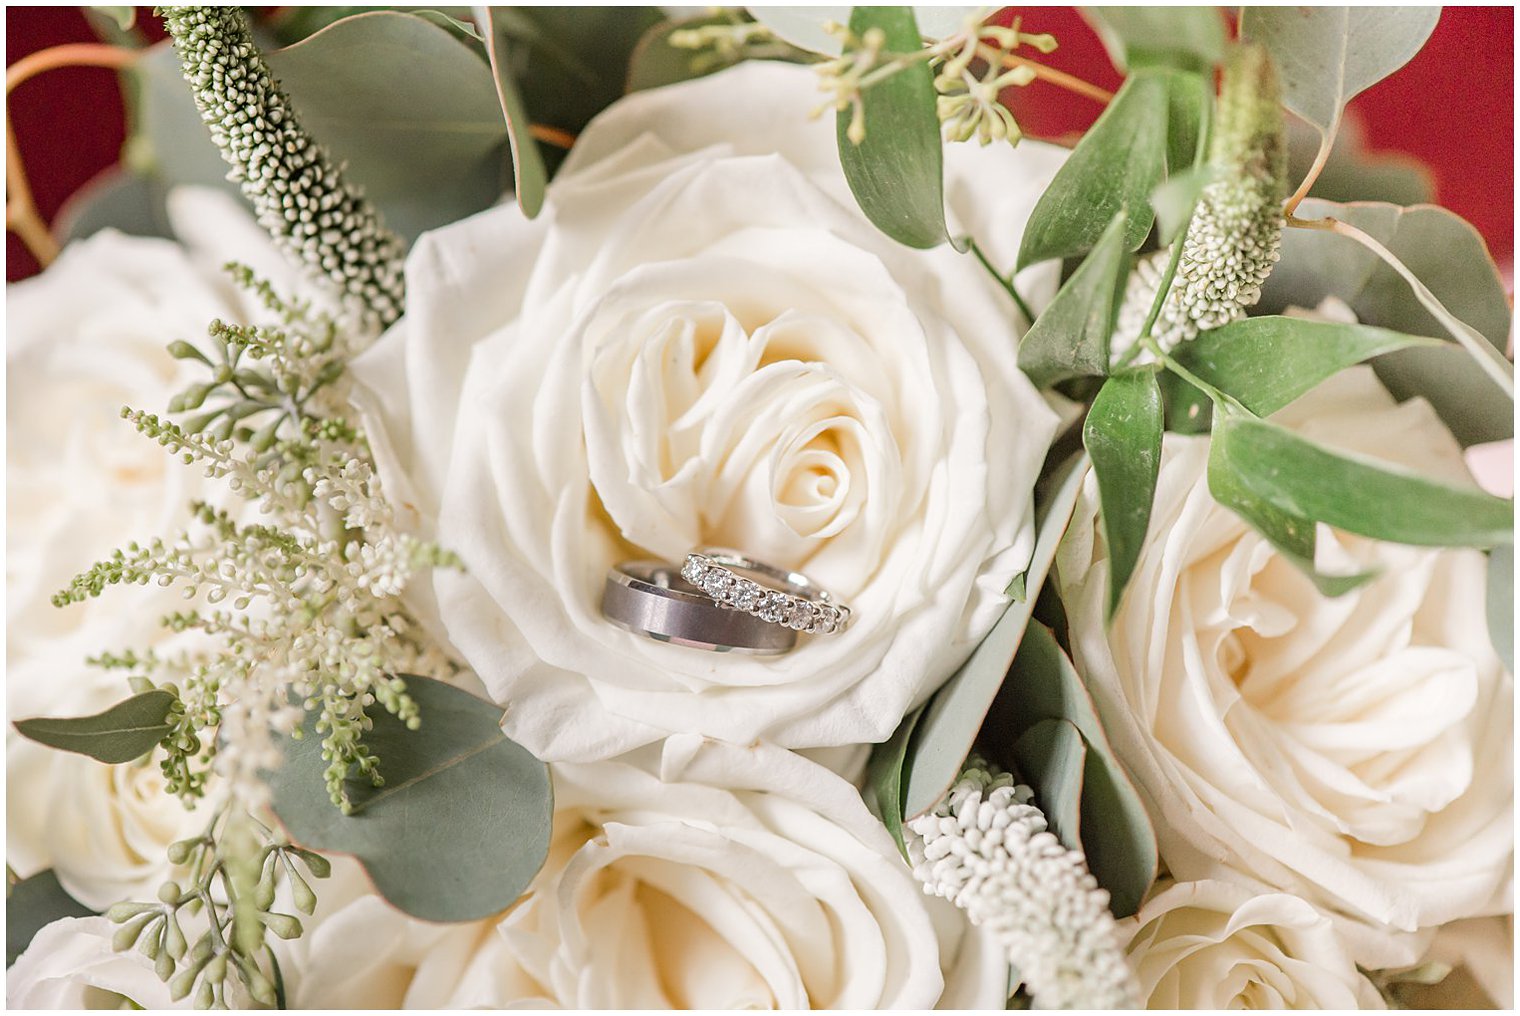 wedding bands lay in white rose